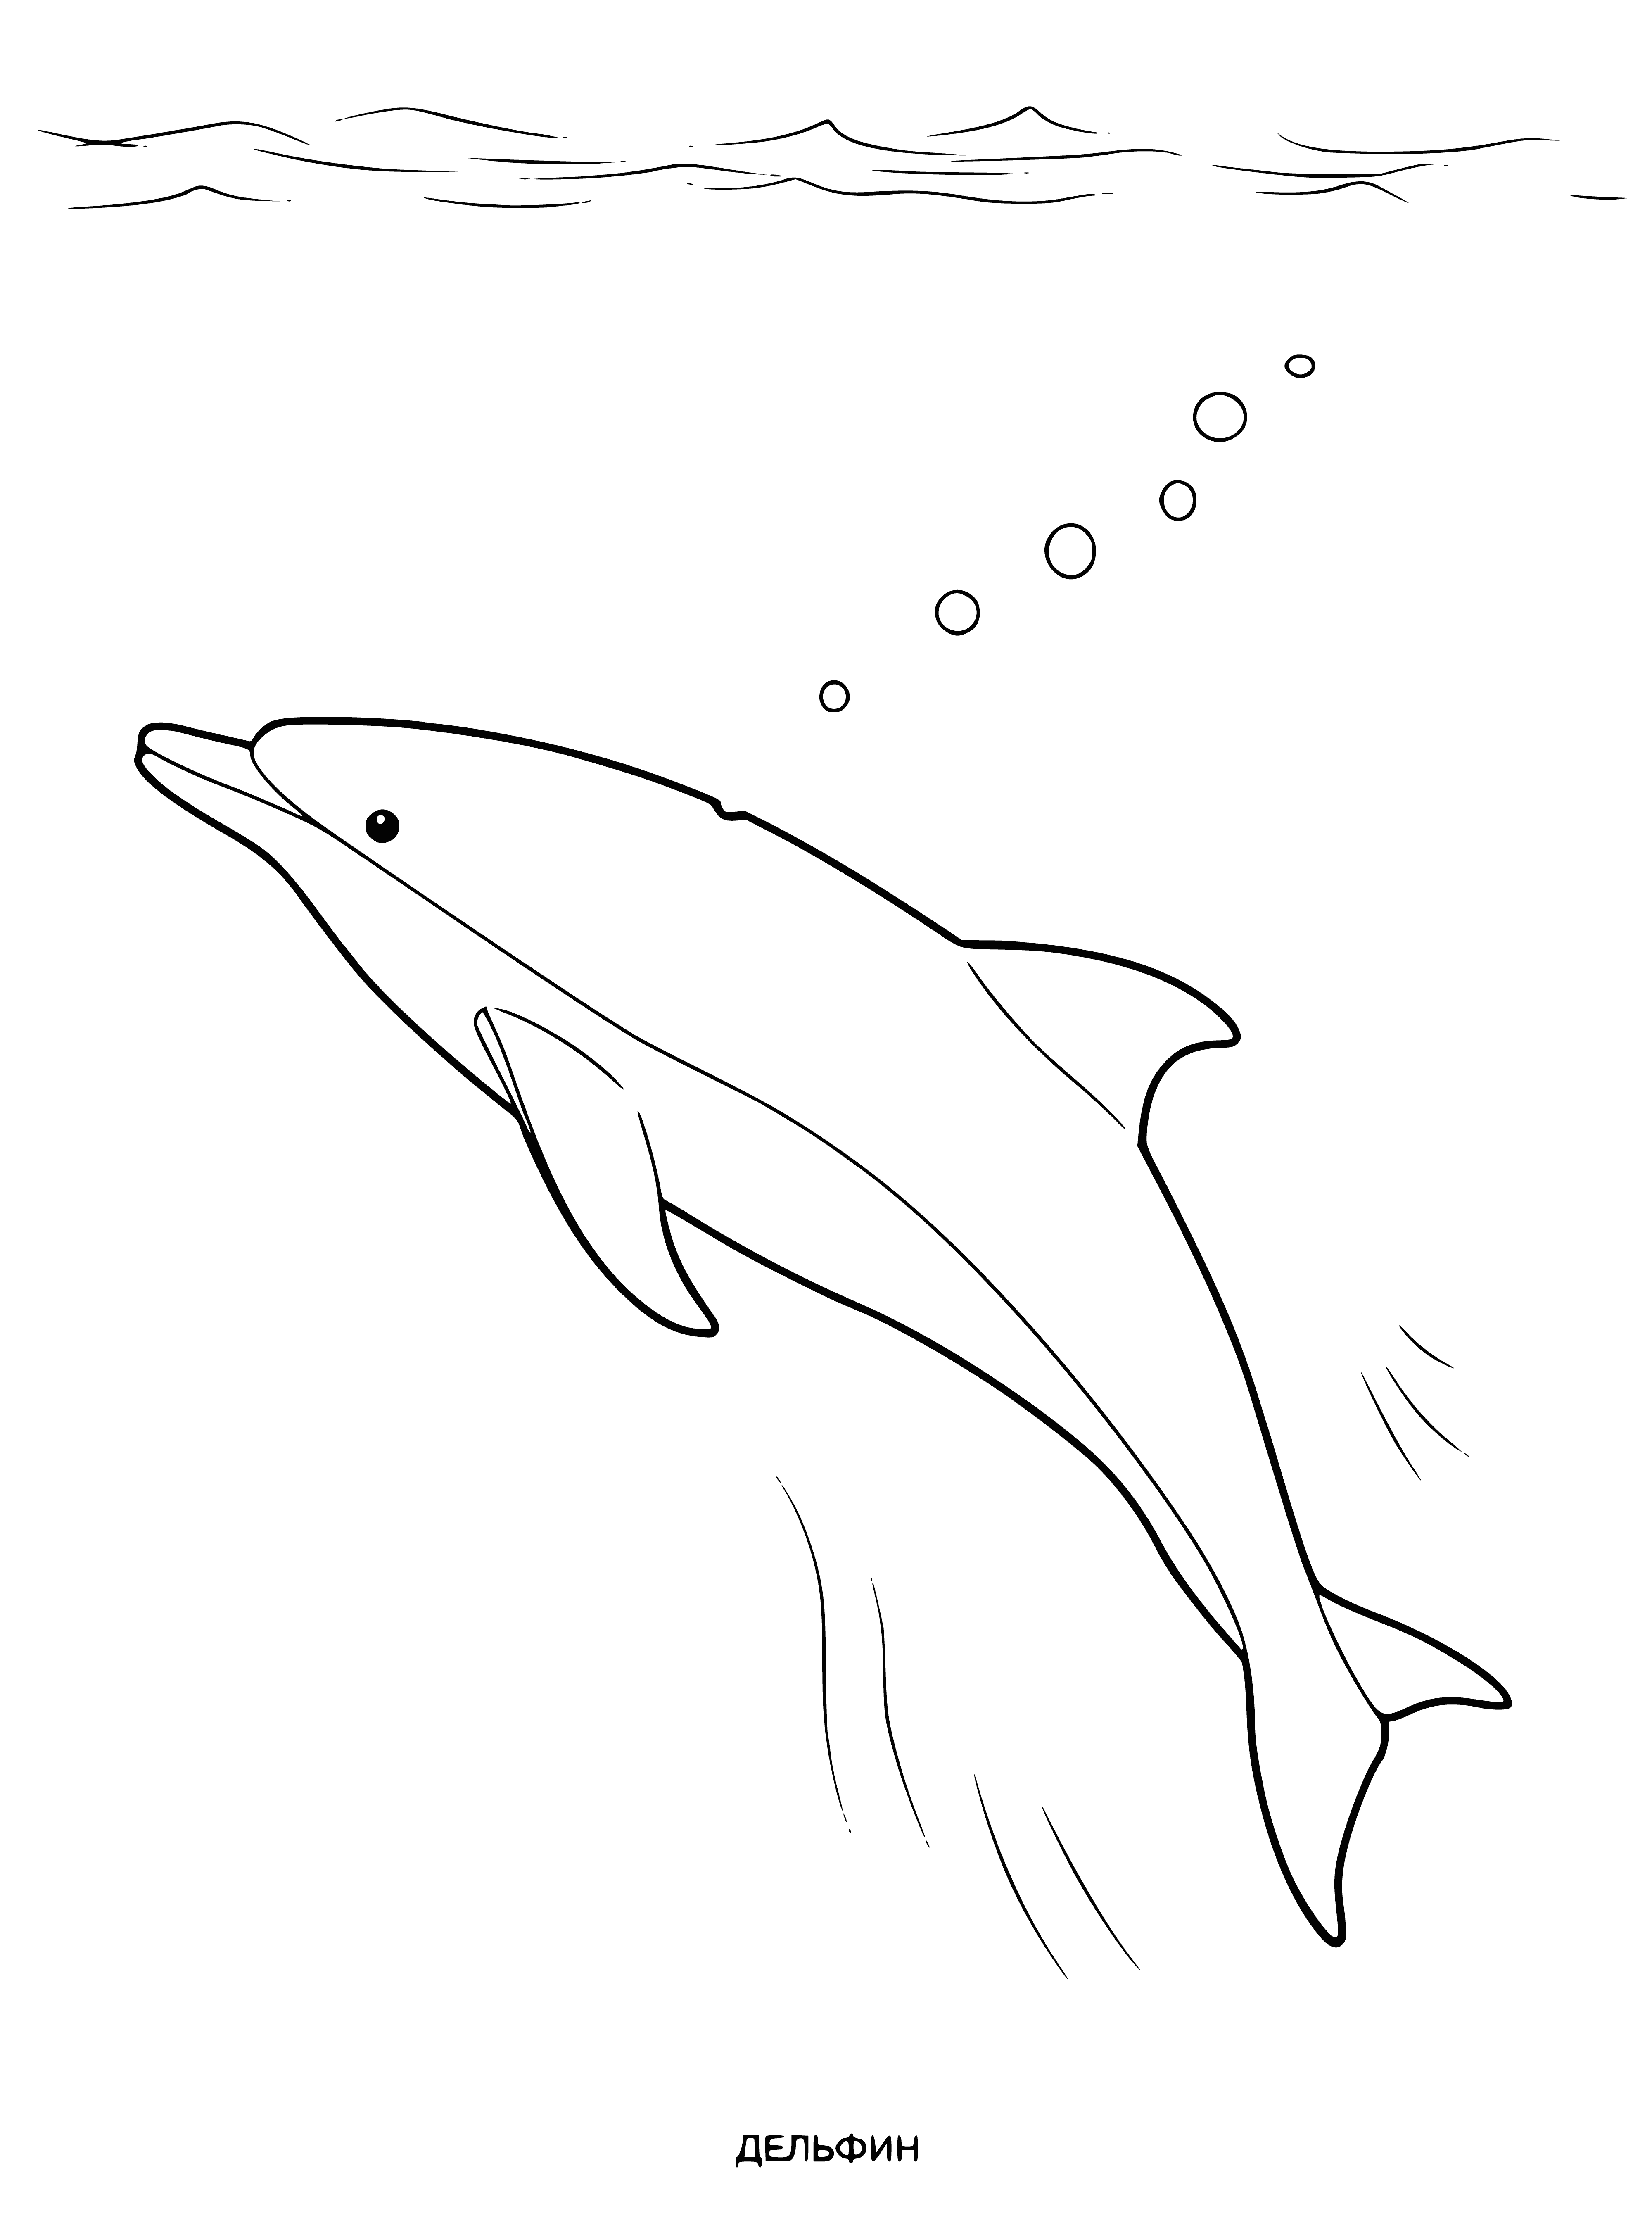 coloring page: Beautiful dolphin with light blue body, white nose, yellow belly, and long muscular tail gracefully swimming through the water. #Nature